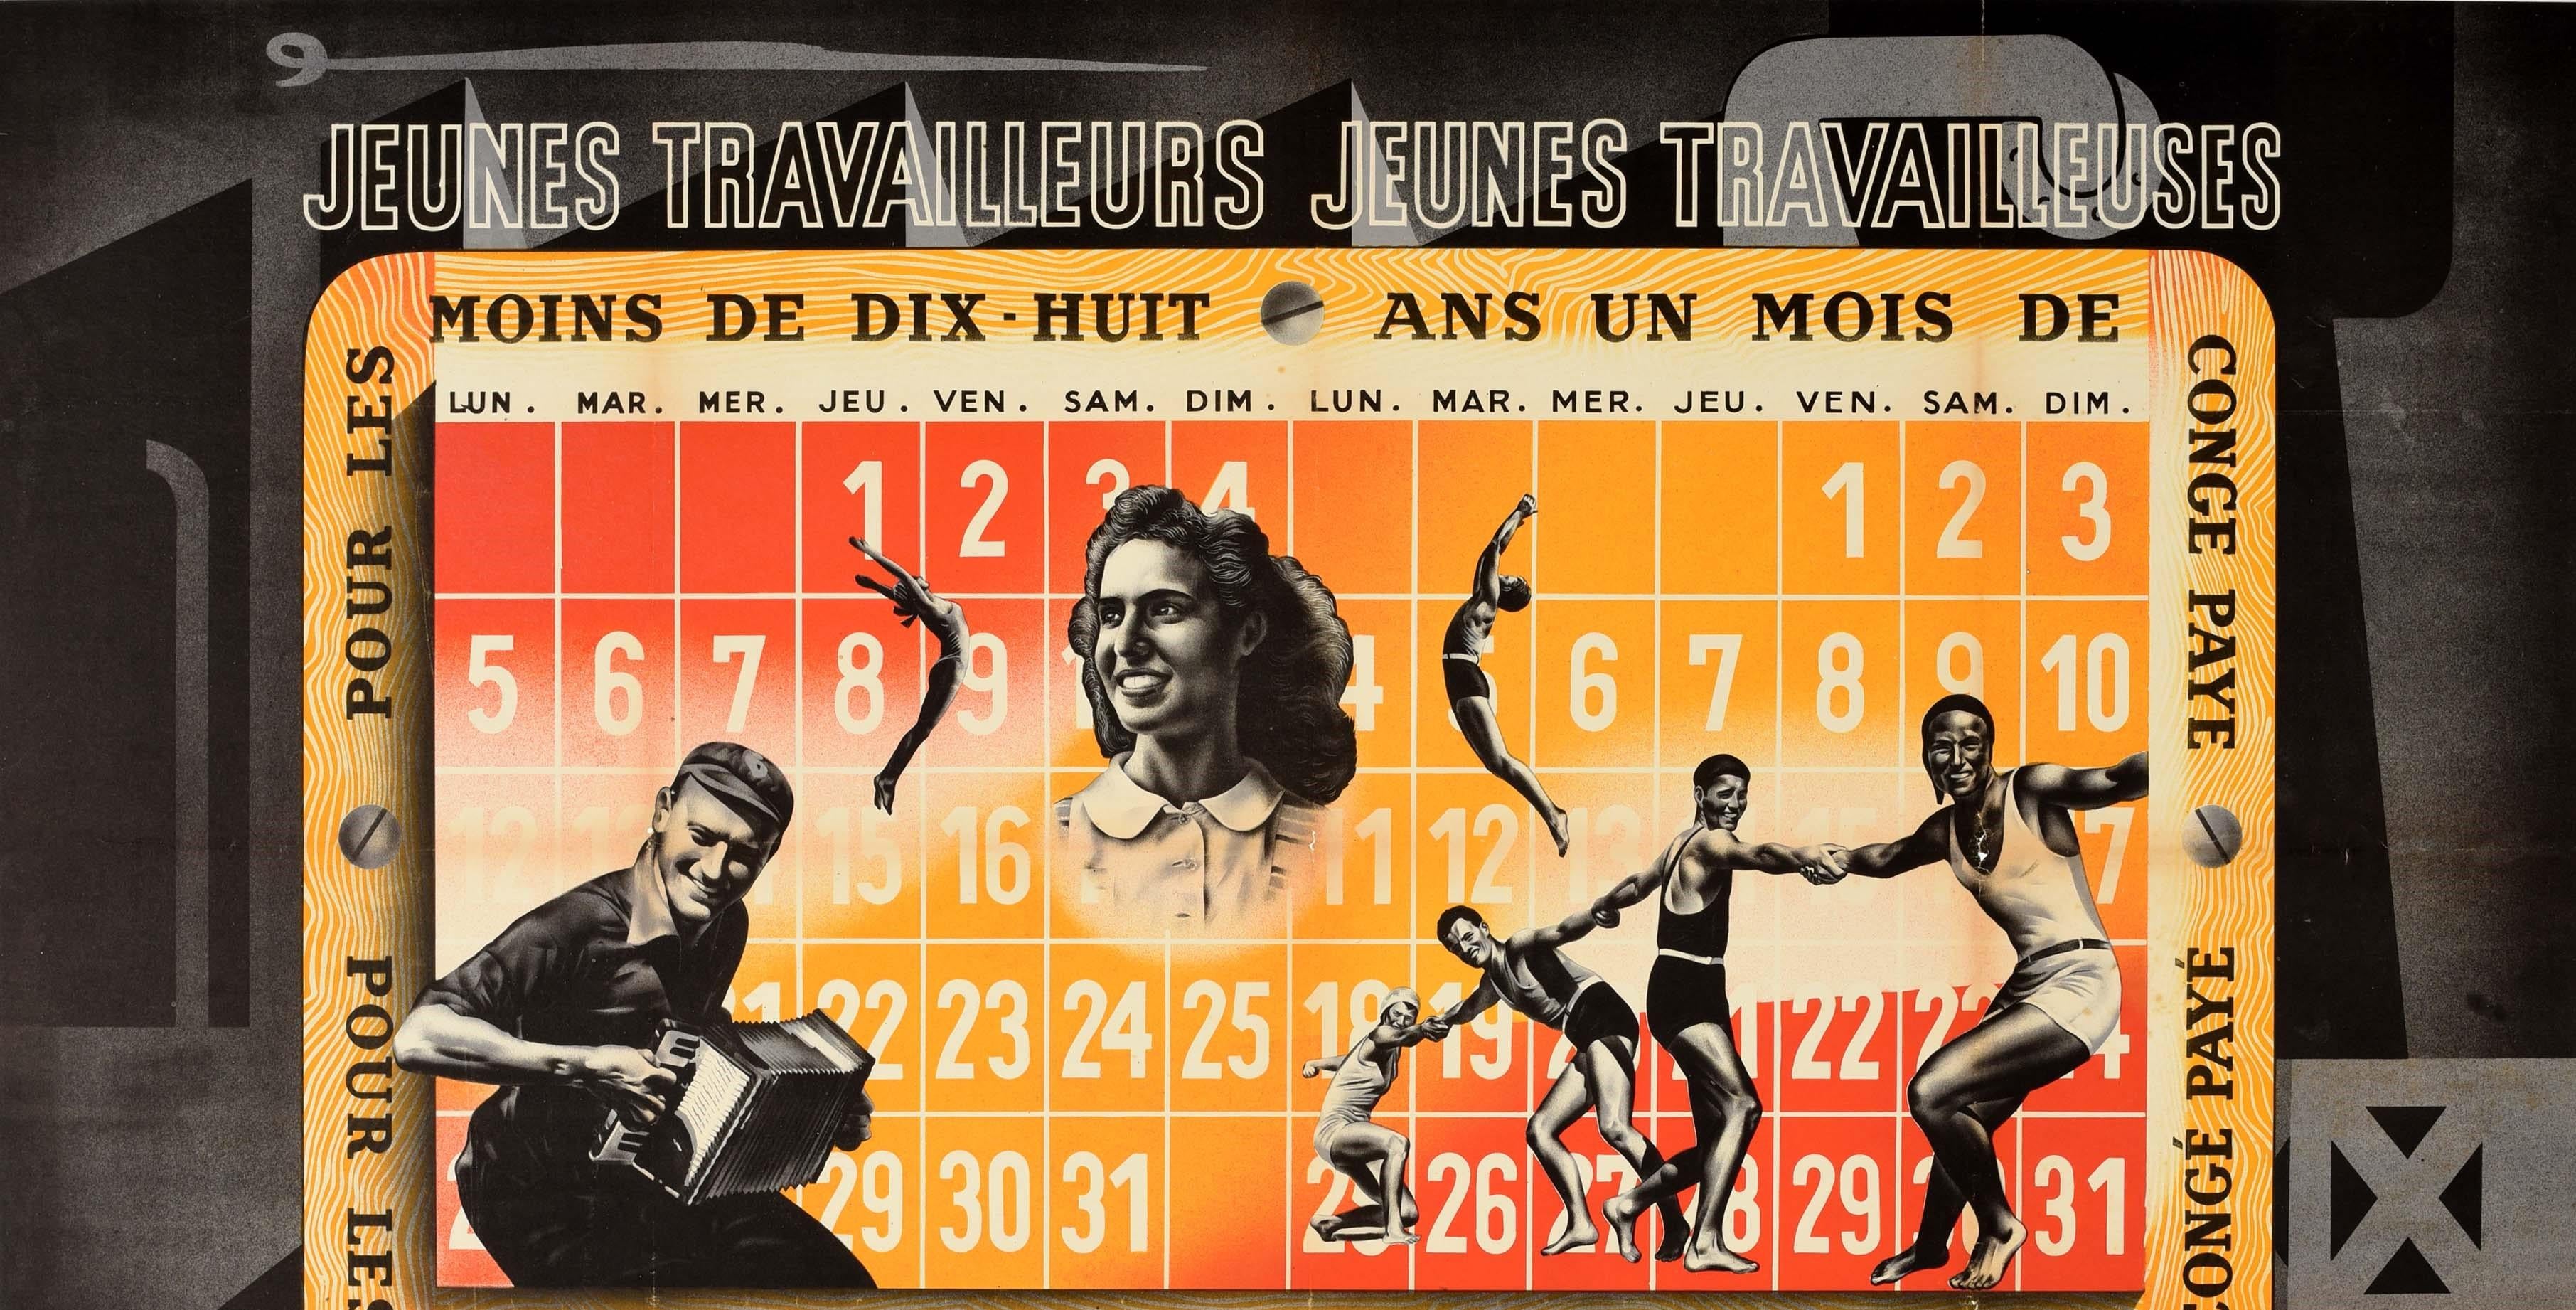 Original vintage propaganda poster - Young Workers The JOC Protects Your Health / Jeunes Travailleurs Jeunes Travailleuses La J.O.C. Defend Votre Sante - featuring a modernist photomontage design with black and white photos of people playing sport